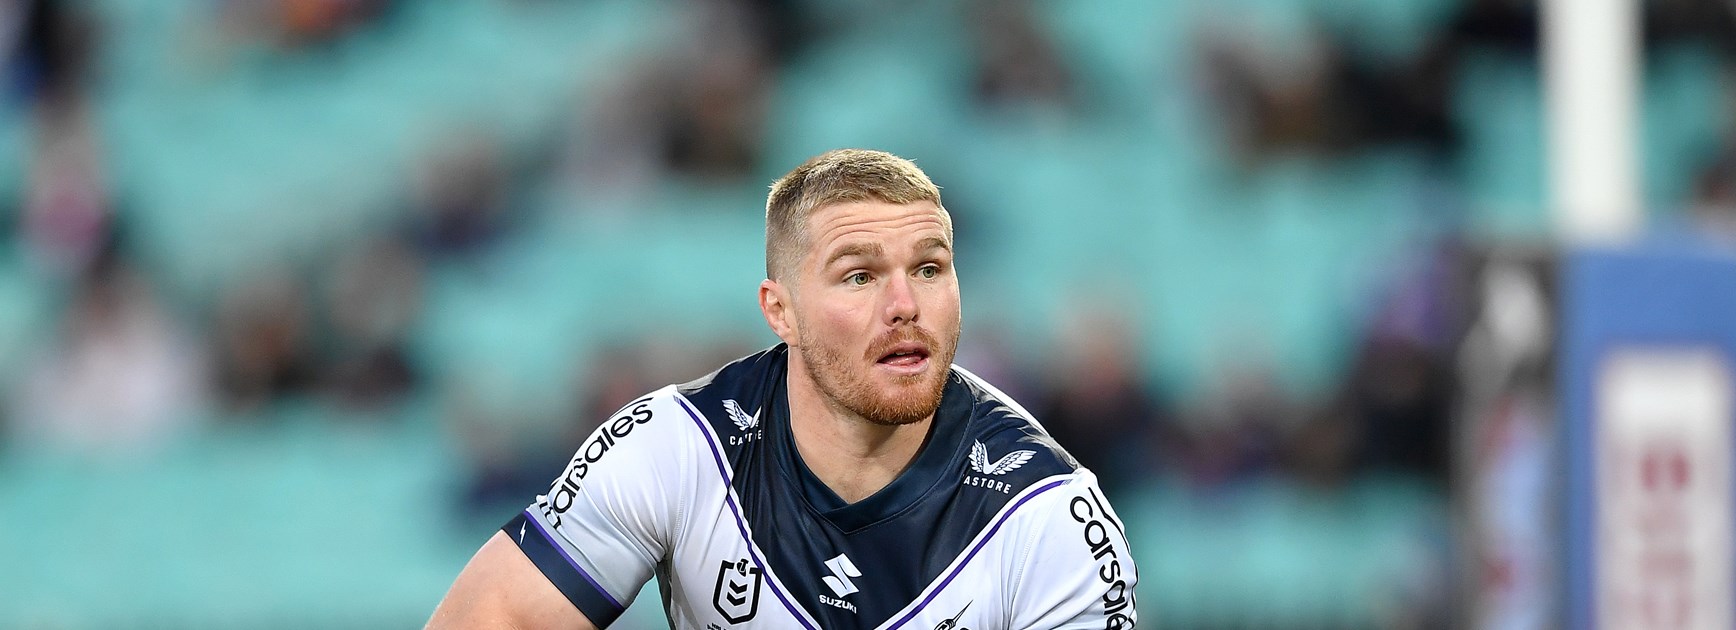 King ready for different role at Storm